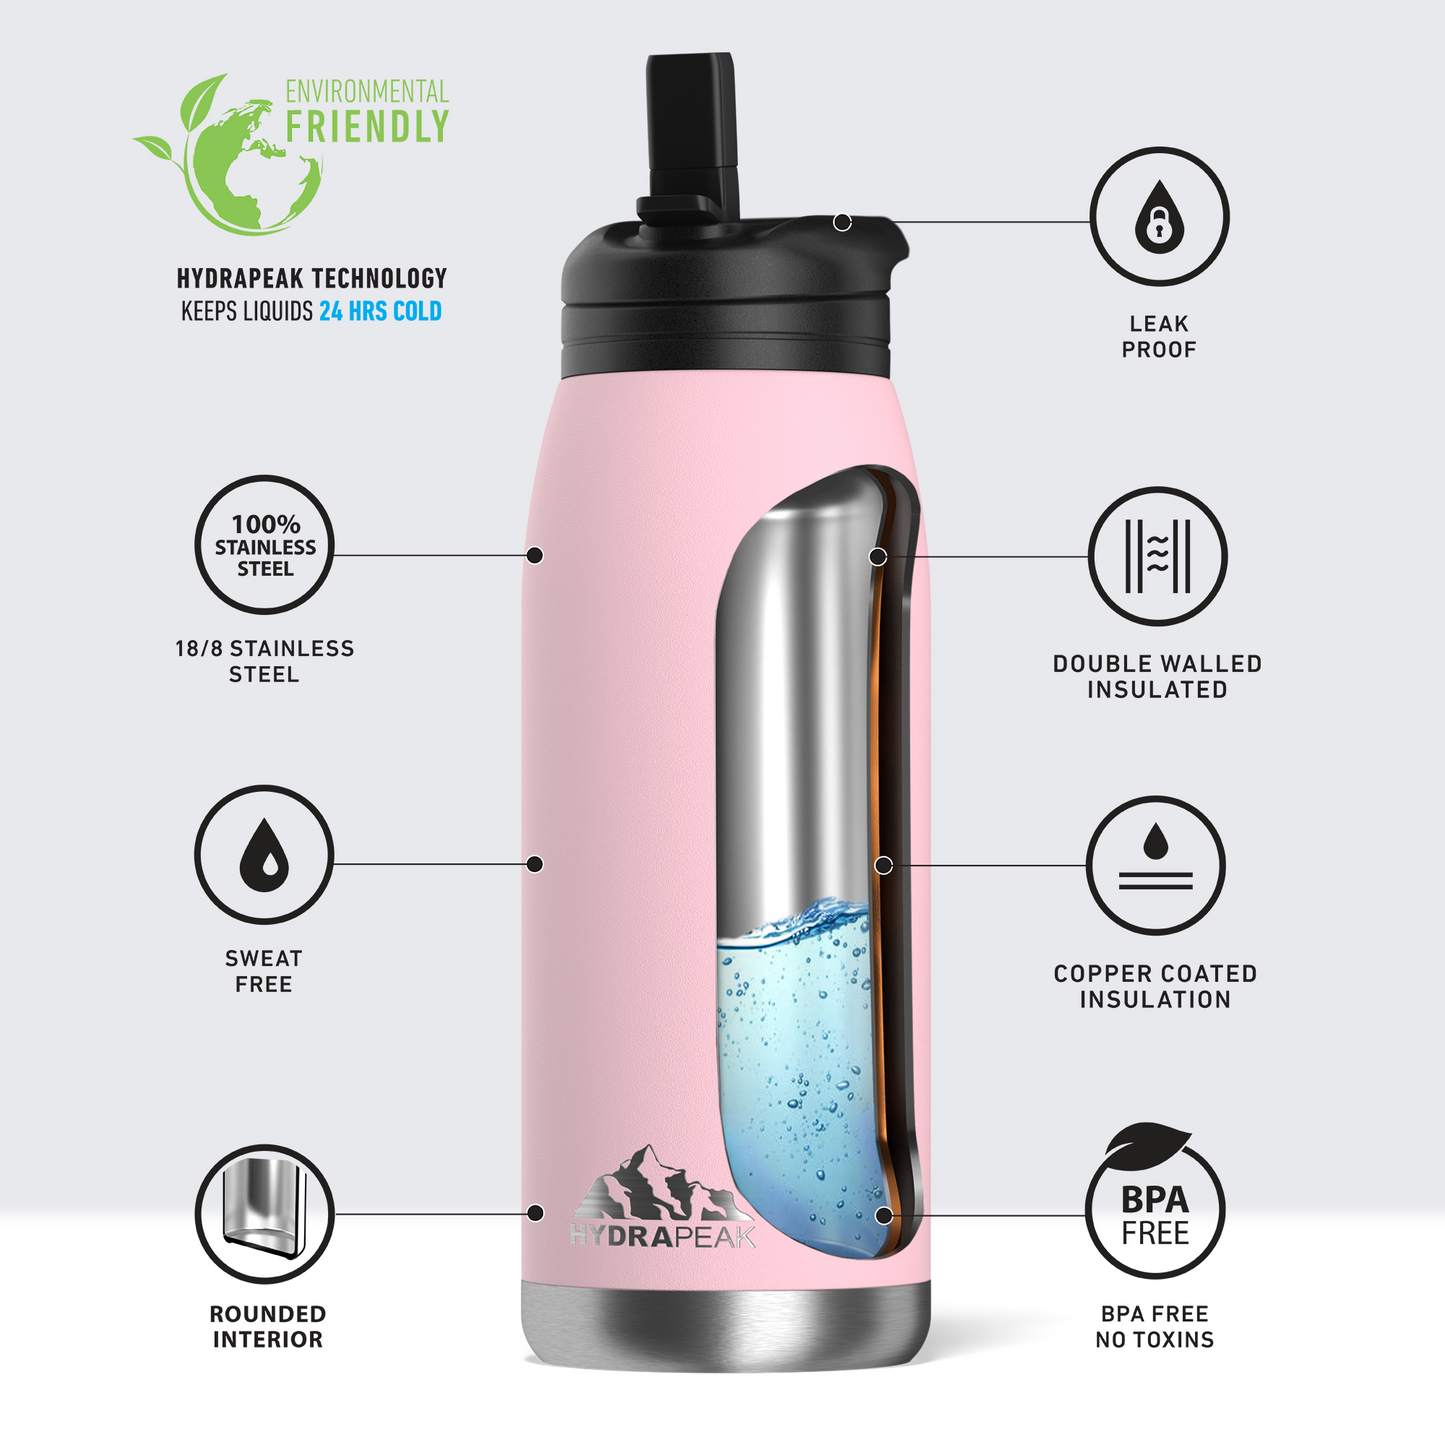 Flow 32oz Stainless Steel Insulated Water Bottle with Straw Lid Bottle- Pink